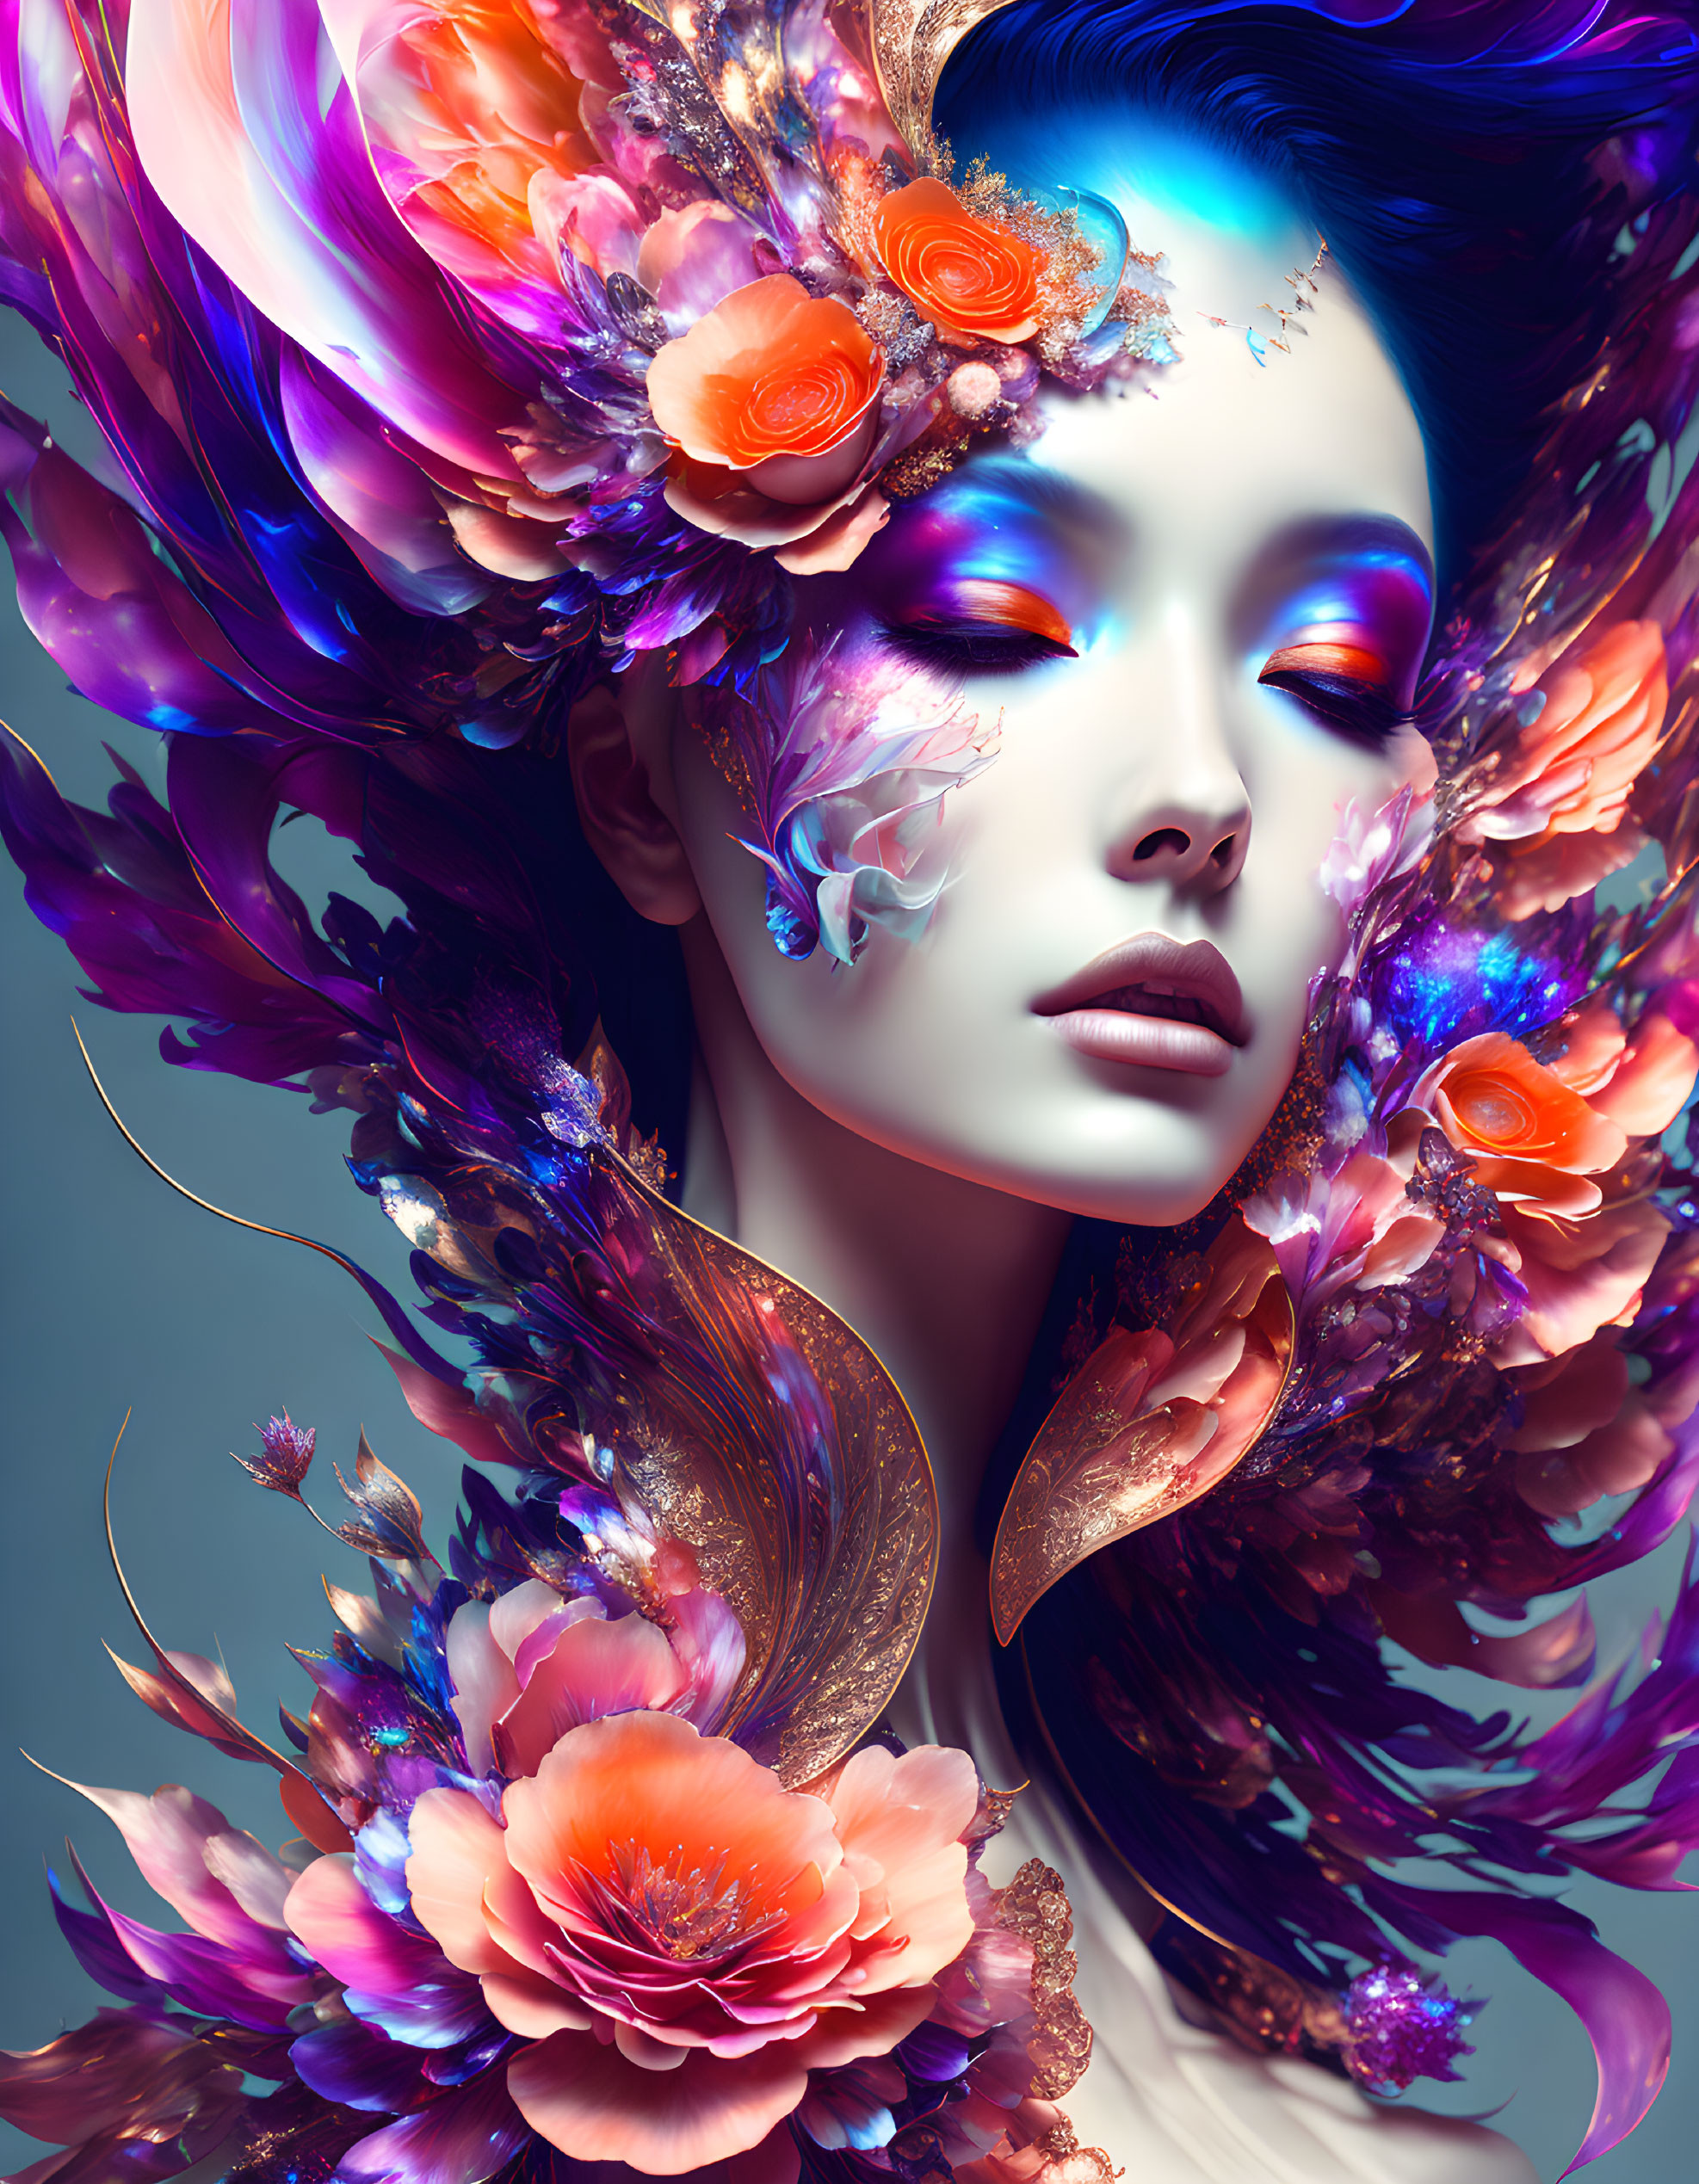 Vibrant surreal portrait of a woman with floral and feather adornments